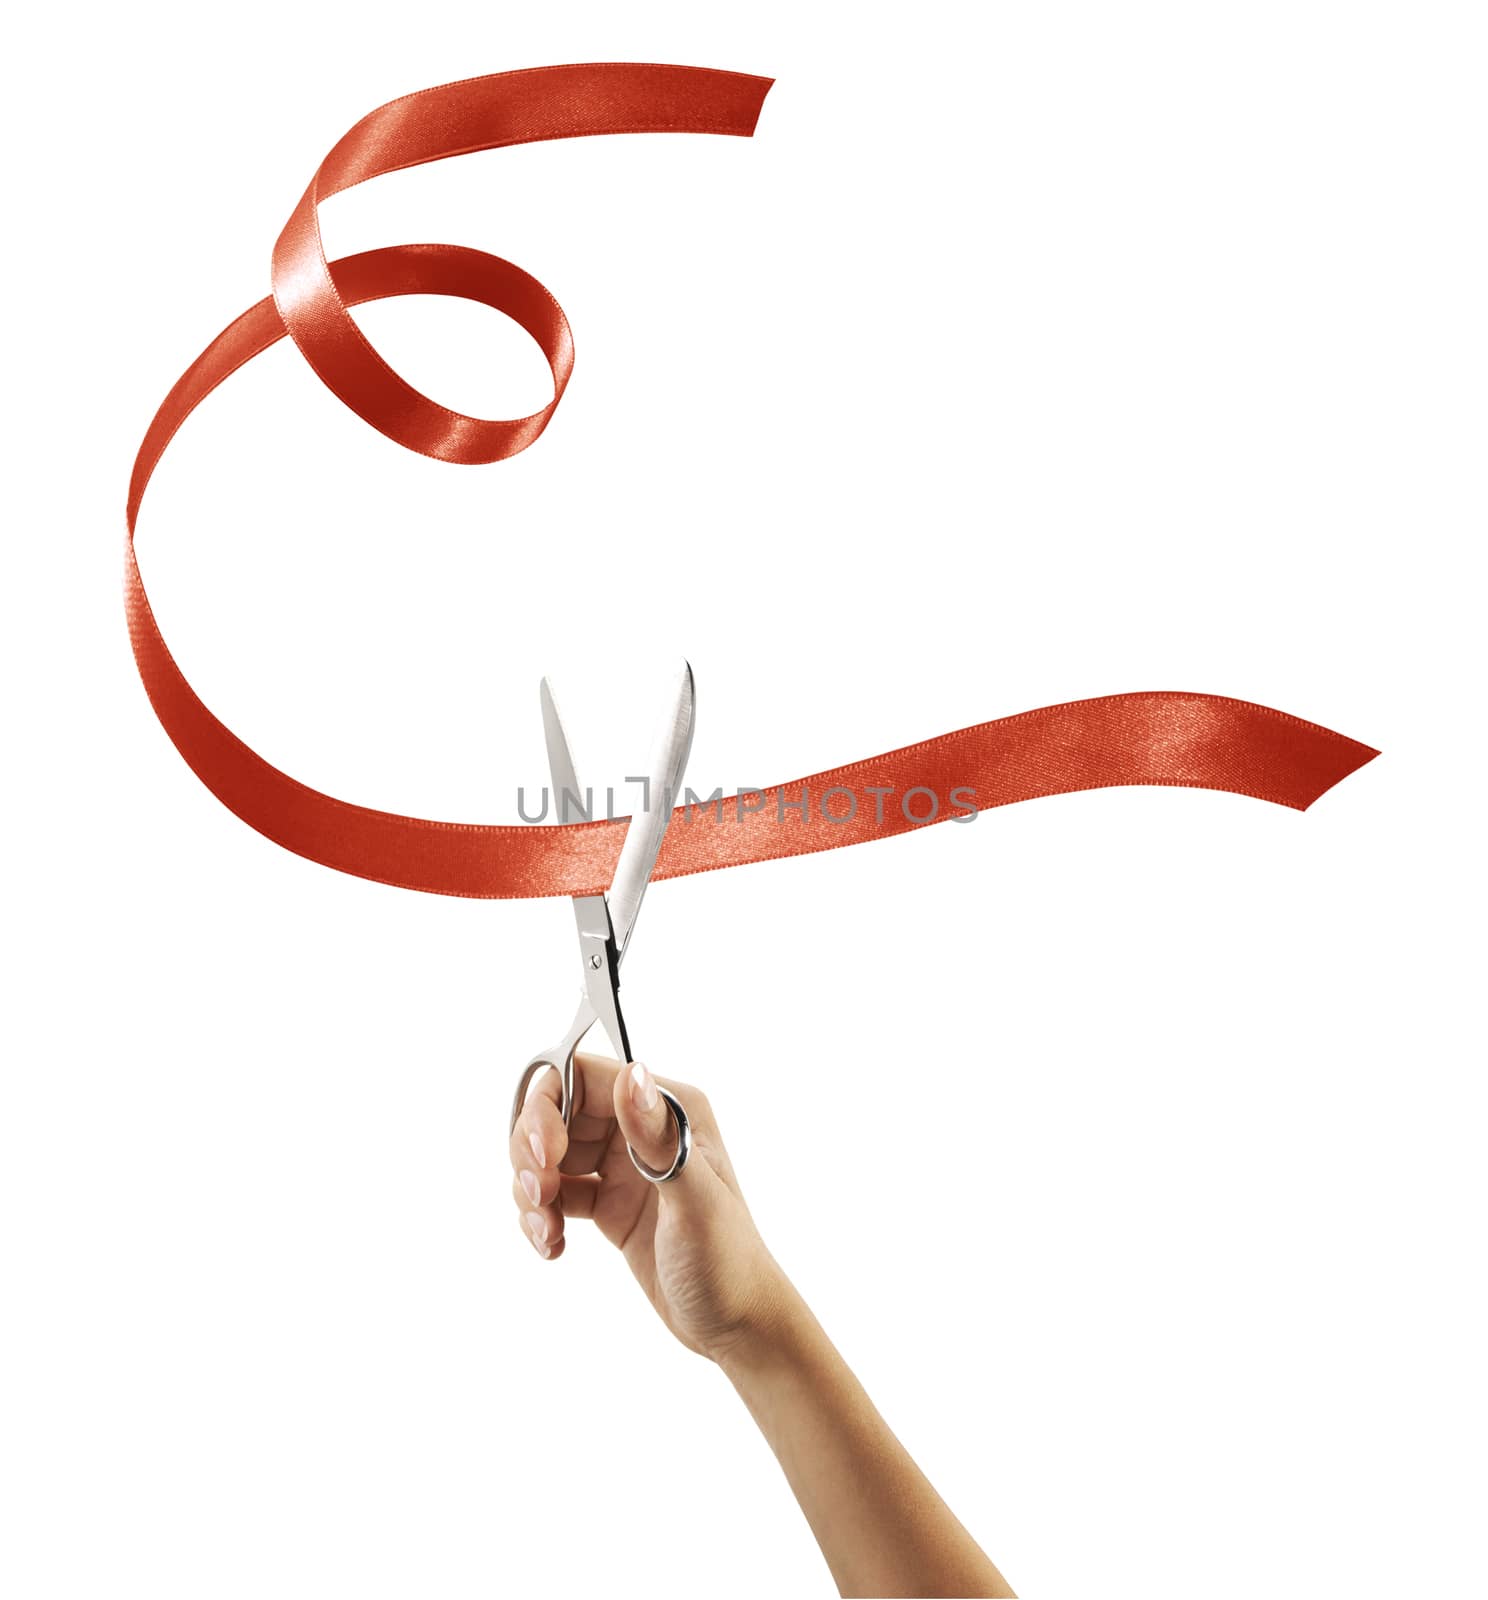 Scissors cutting through red ribbon or tape, isolated on white.
